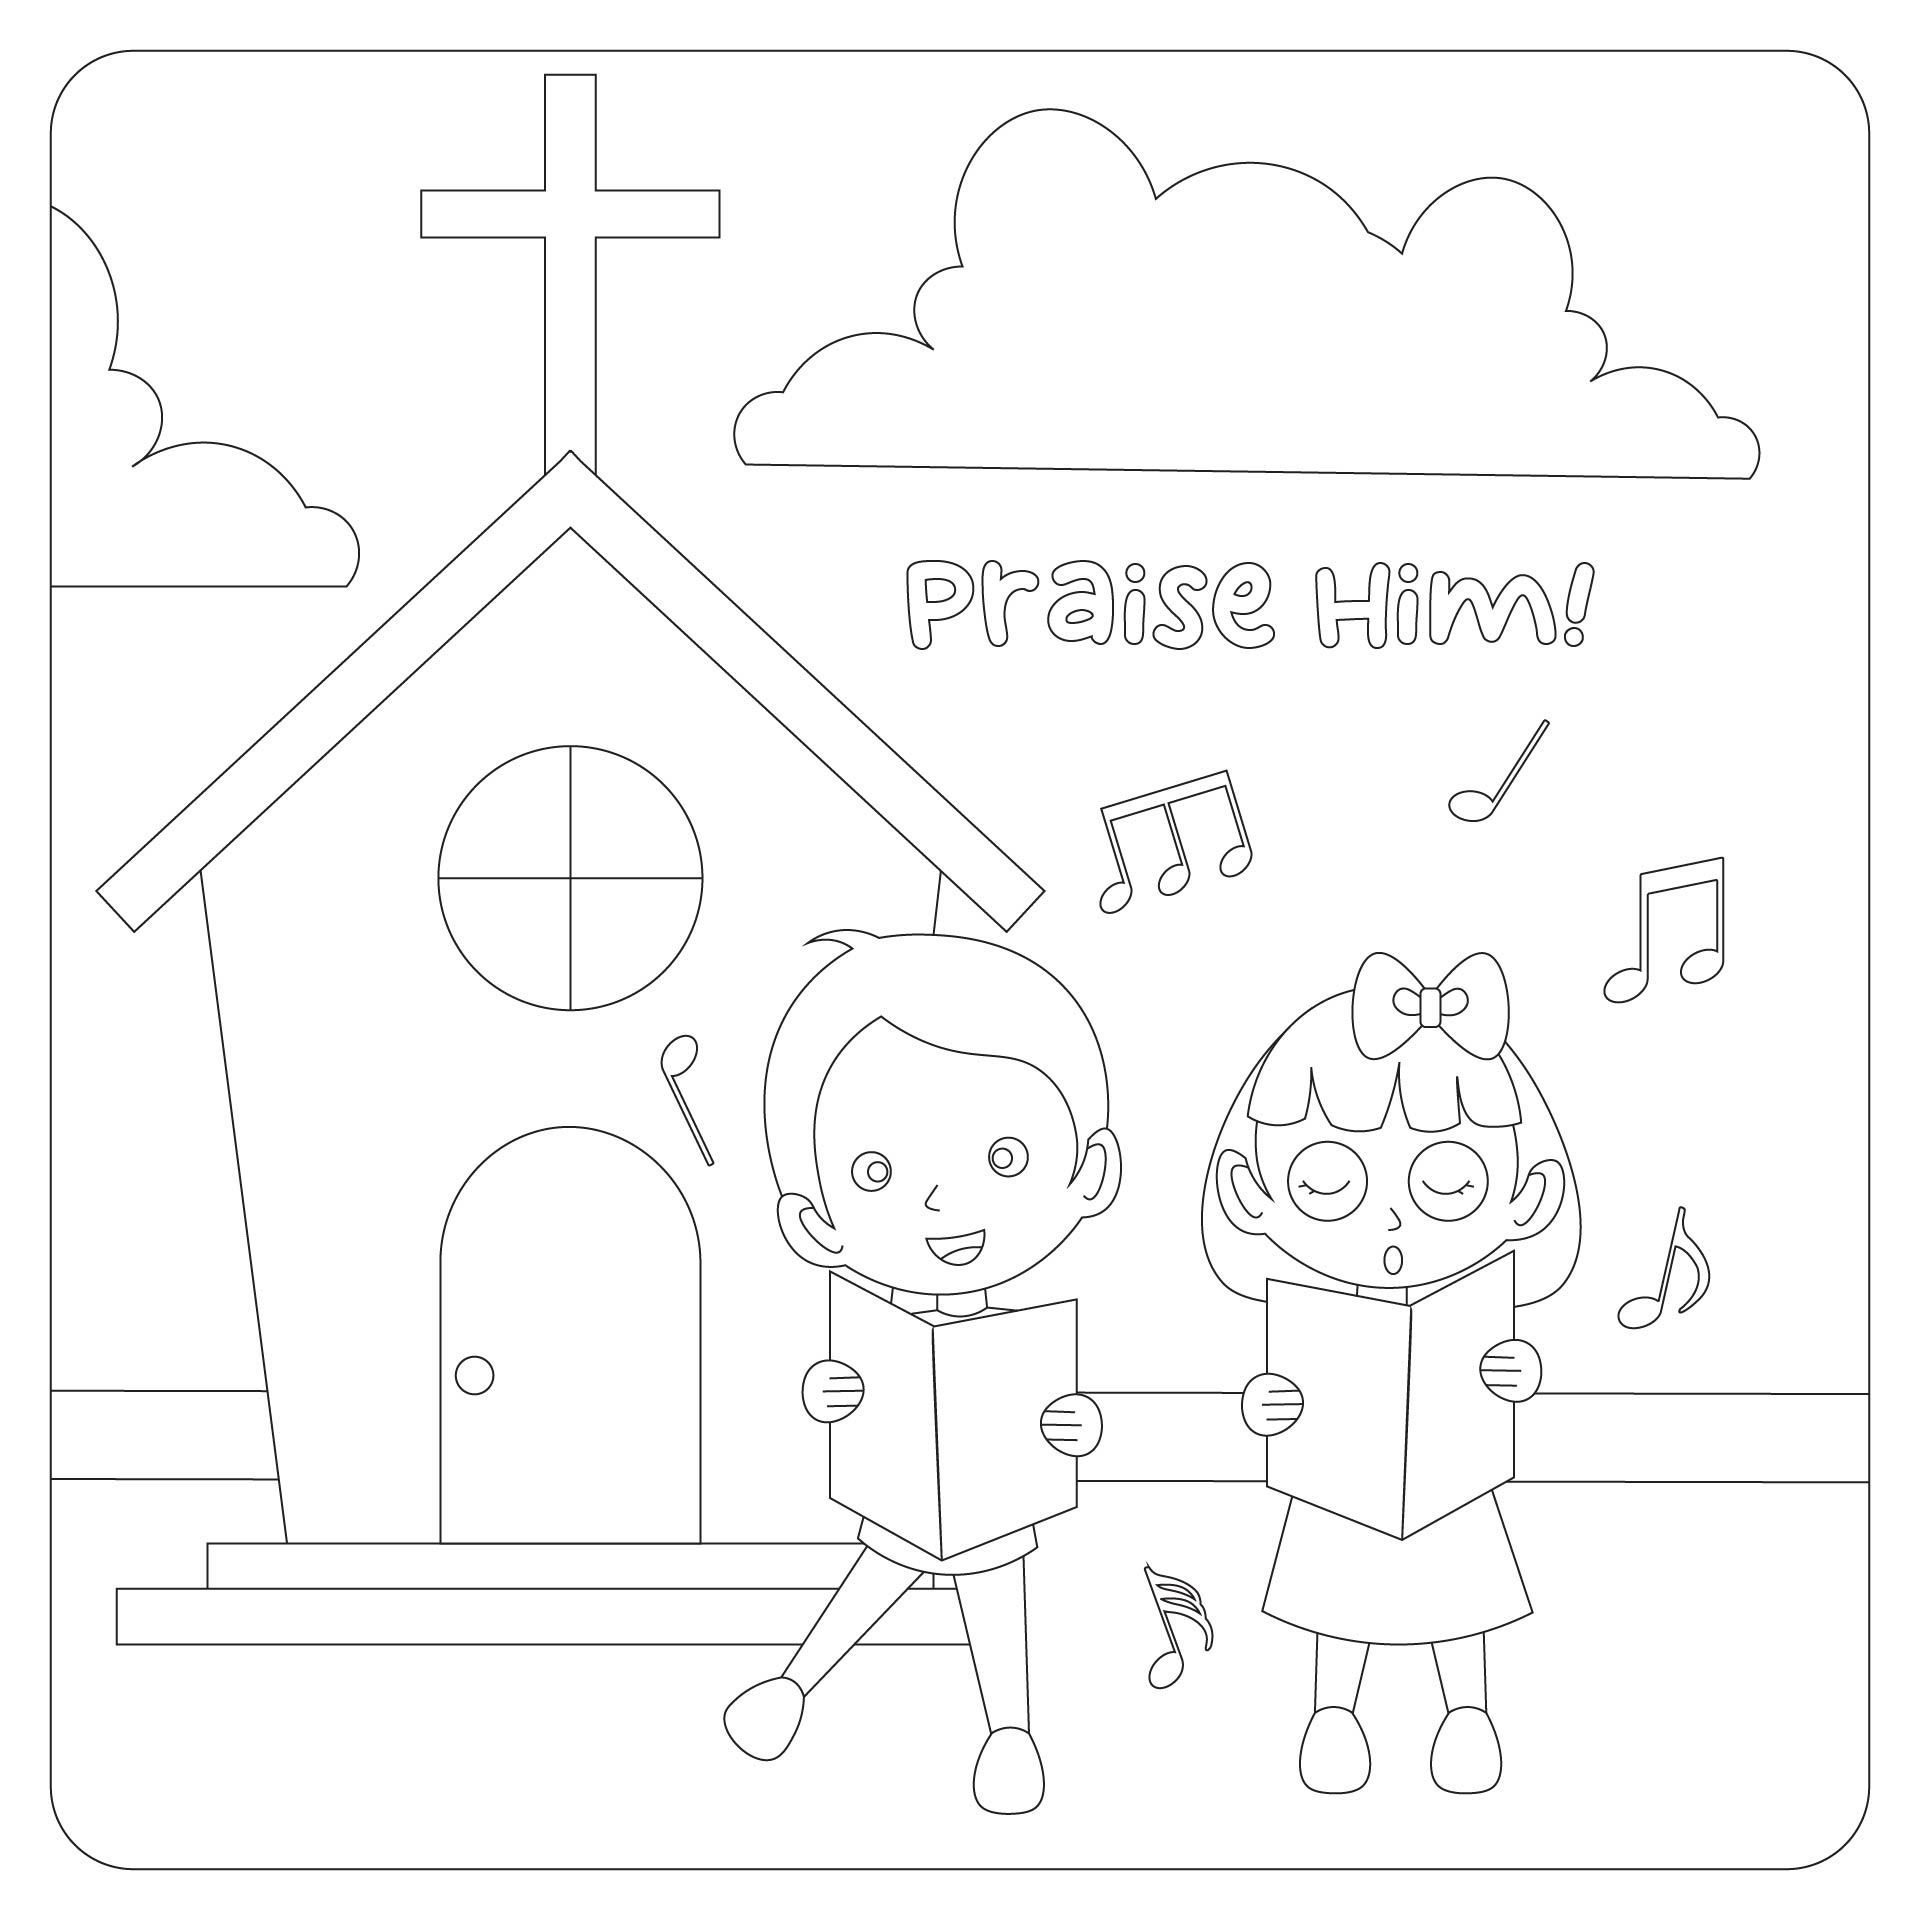 Praise Sunday School Coloring Sheets